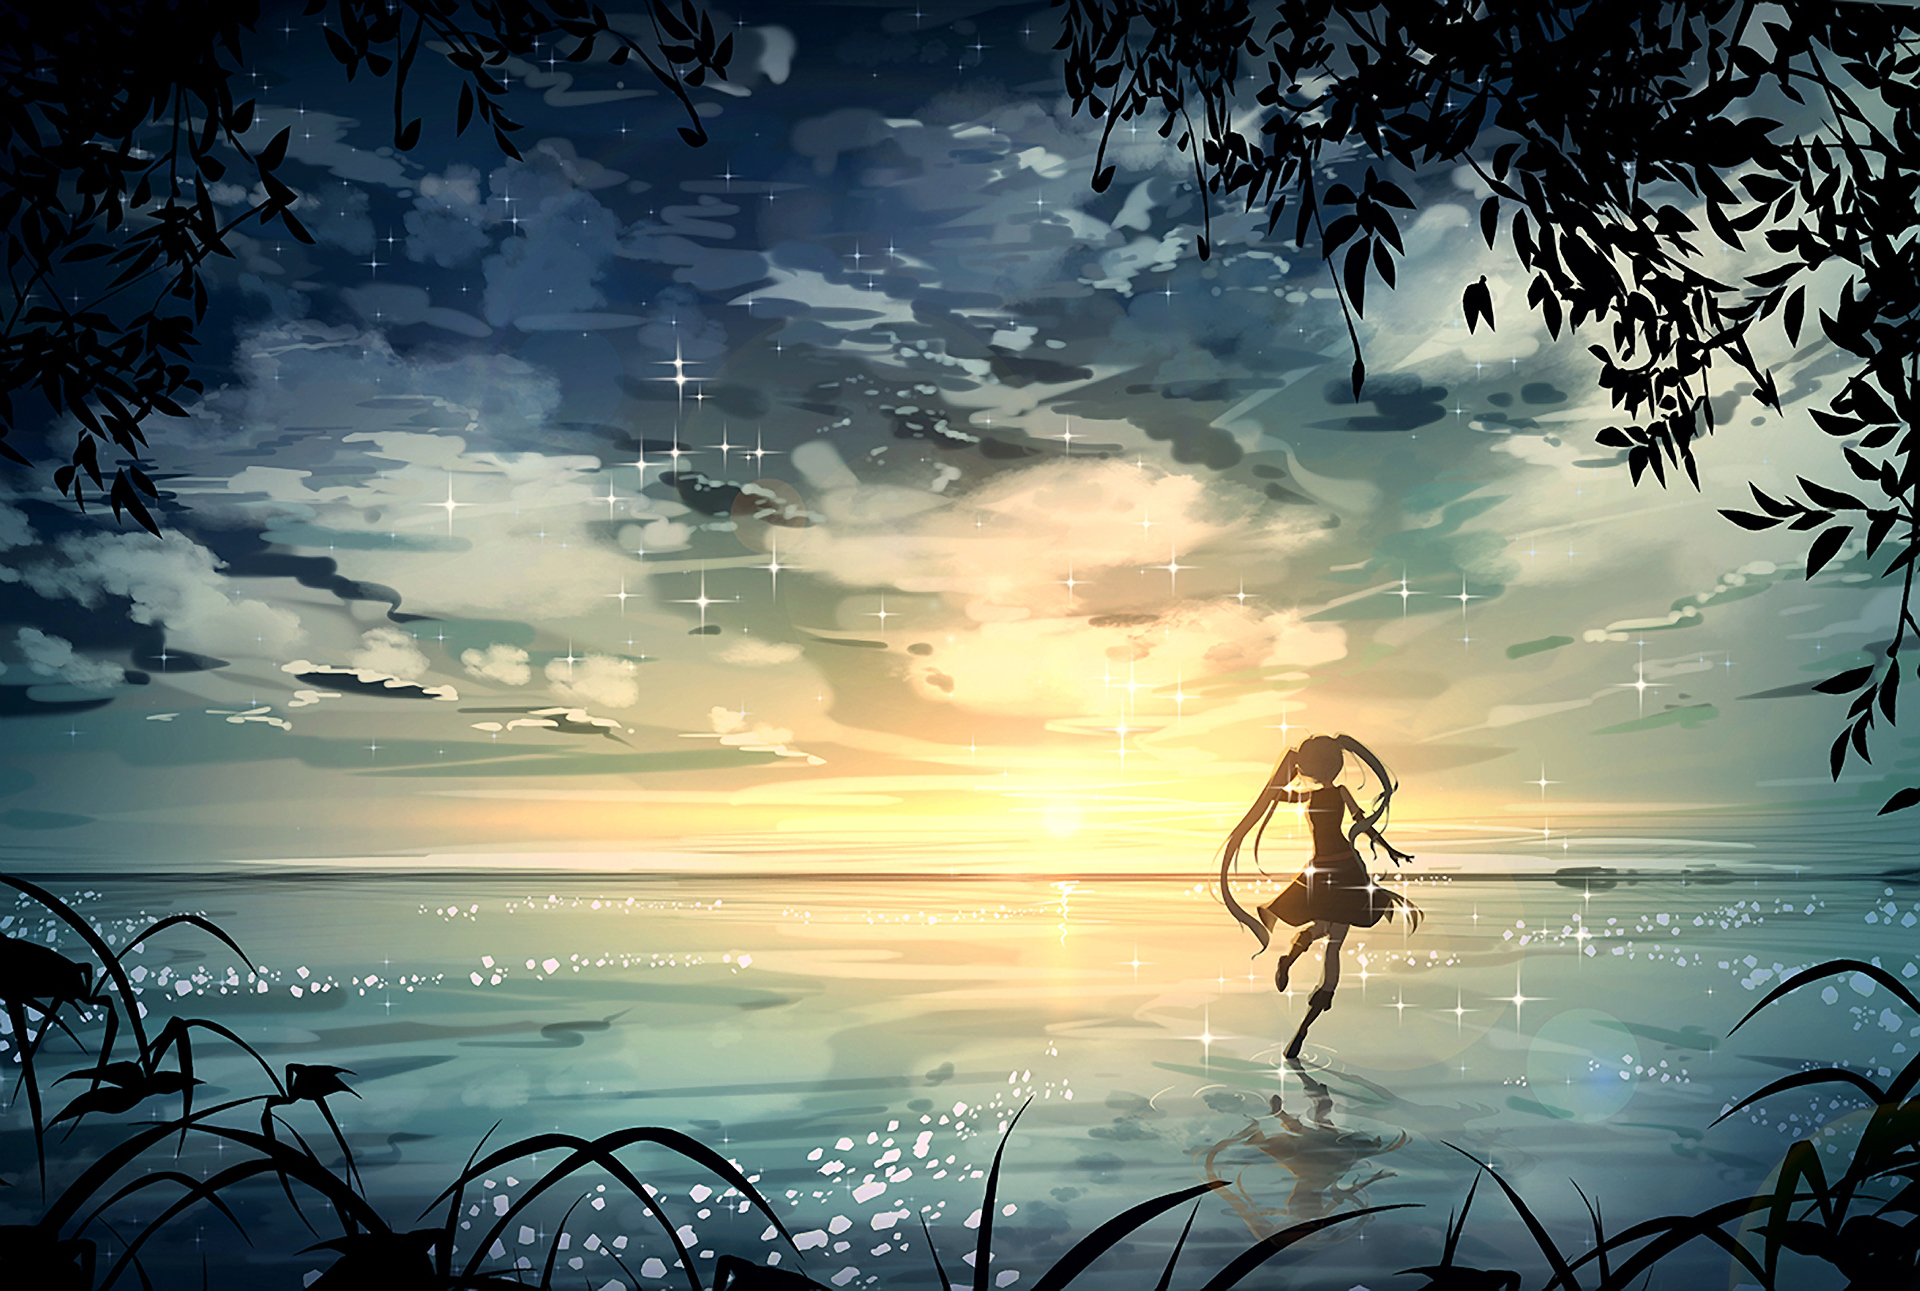 Pure Original Hand Drawn Cartoon Anime Beach Landscape Background Wallpaper  Image For Free Download  Pngtree